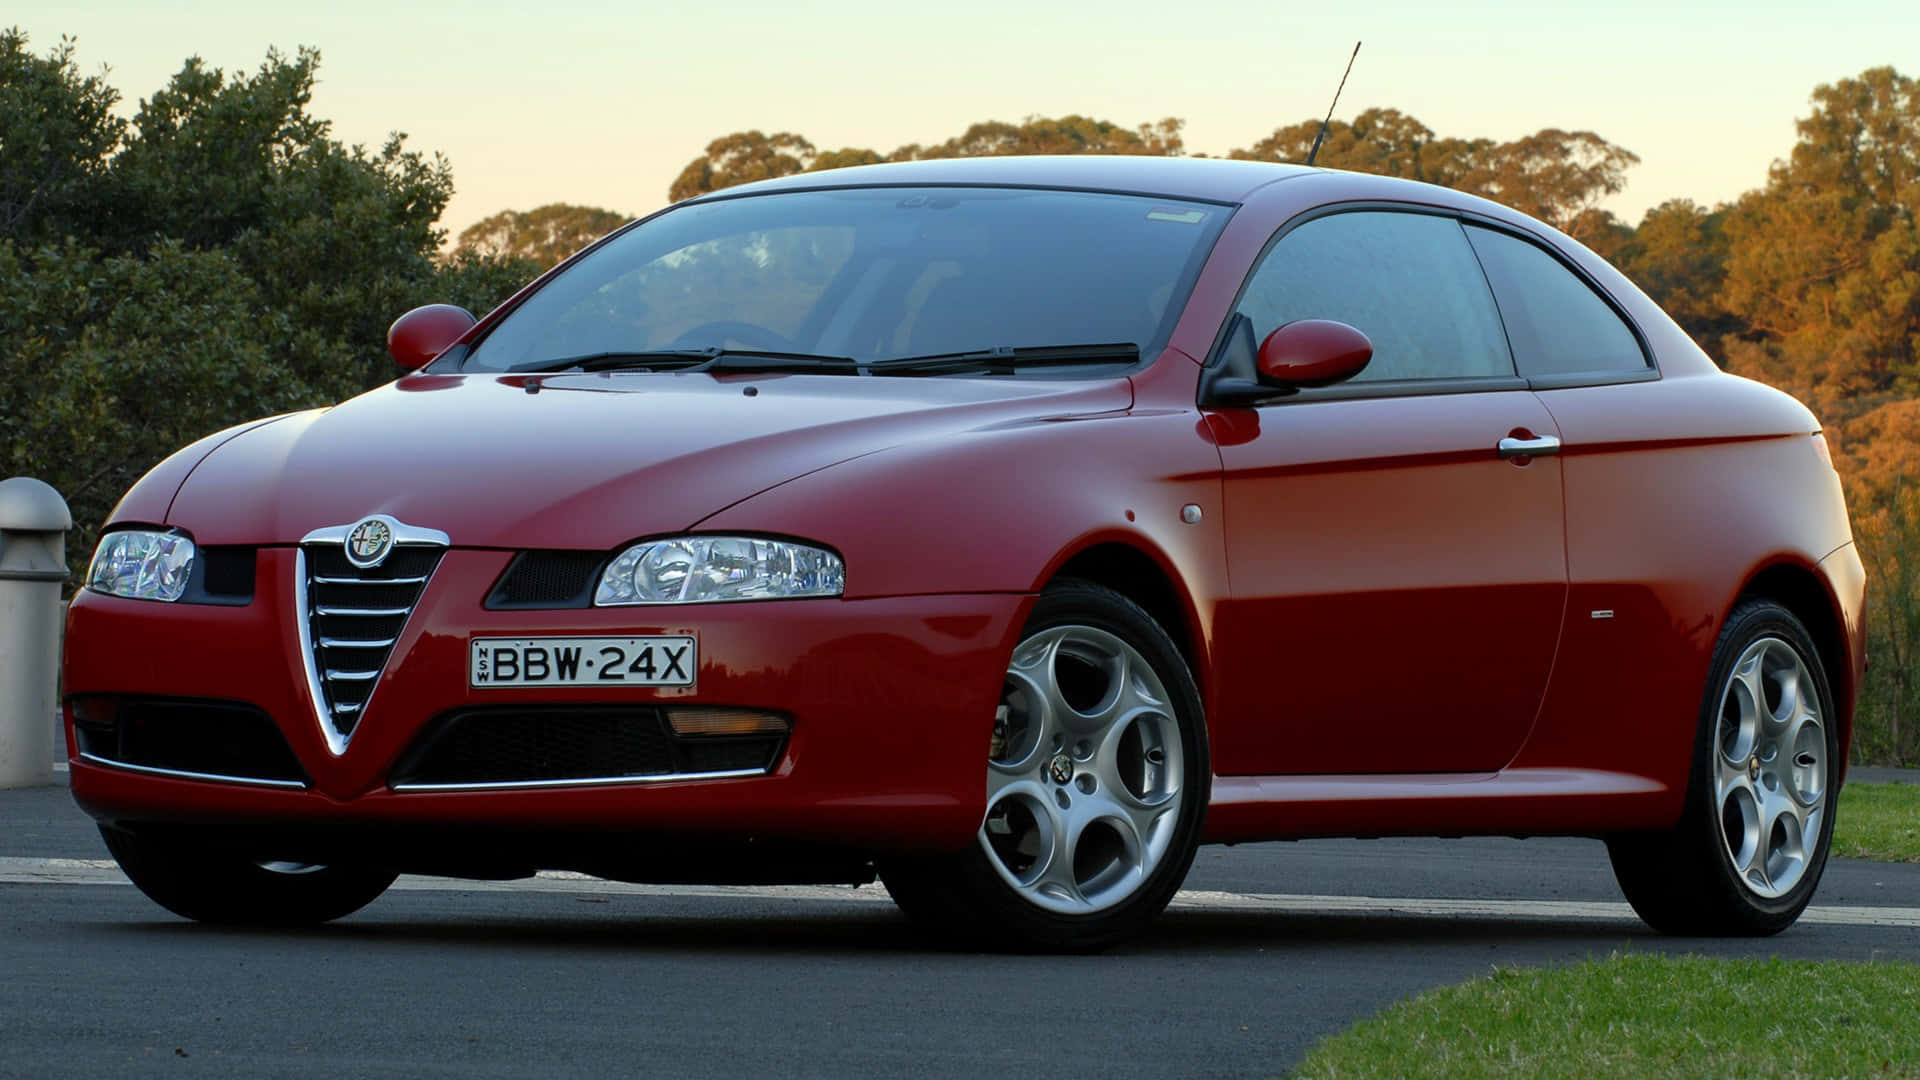 Caption: Sleek Alfa Romeo GT in action on the road Wallpaper